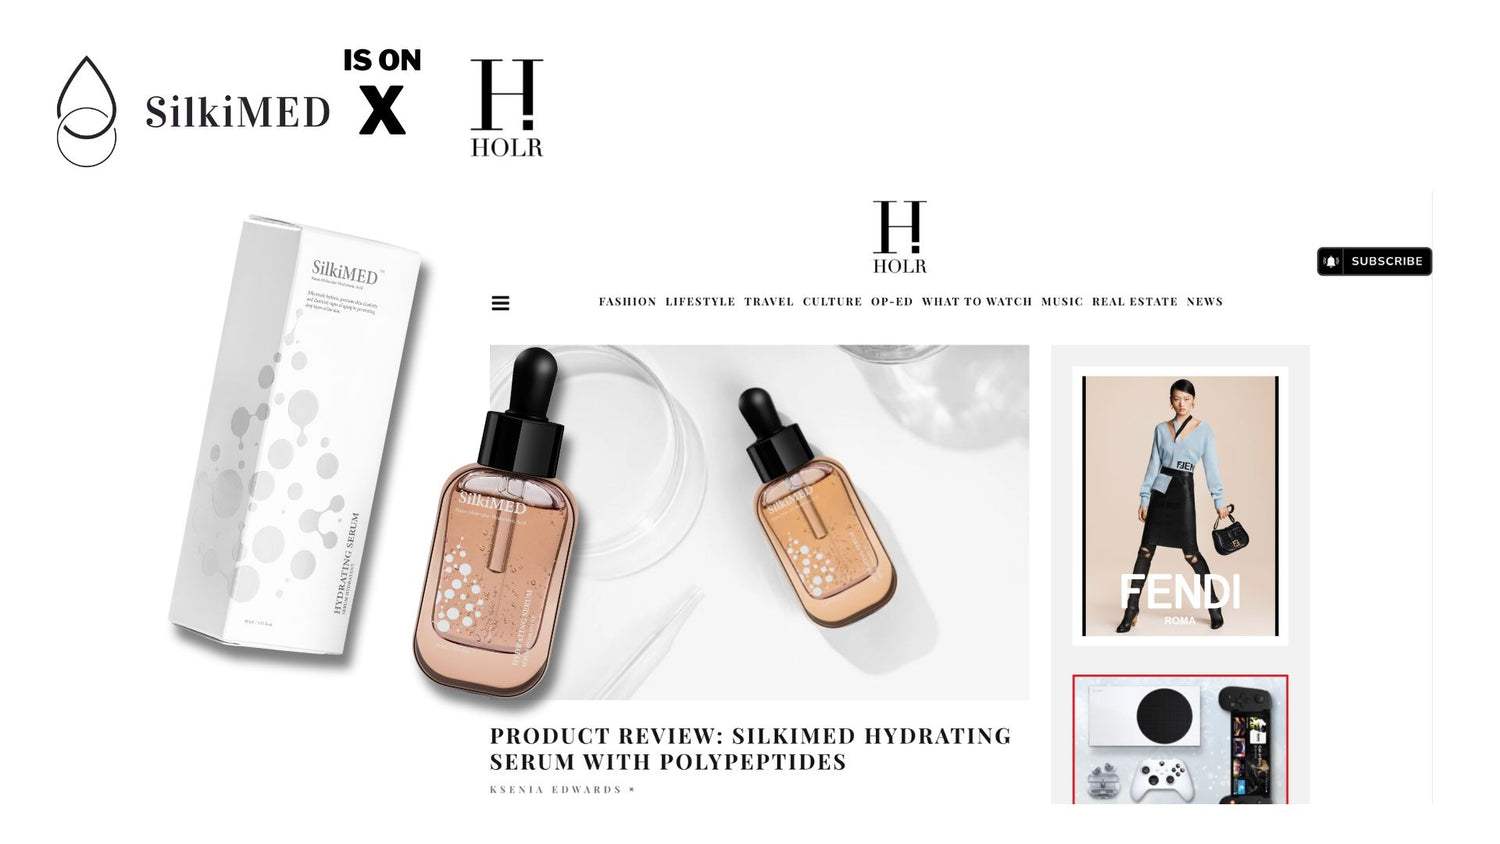 Holr Magazine - SilkiMED Product Review: Hydrating Serum with Polypeptides